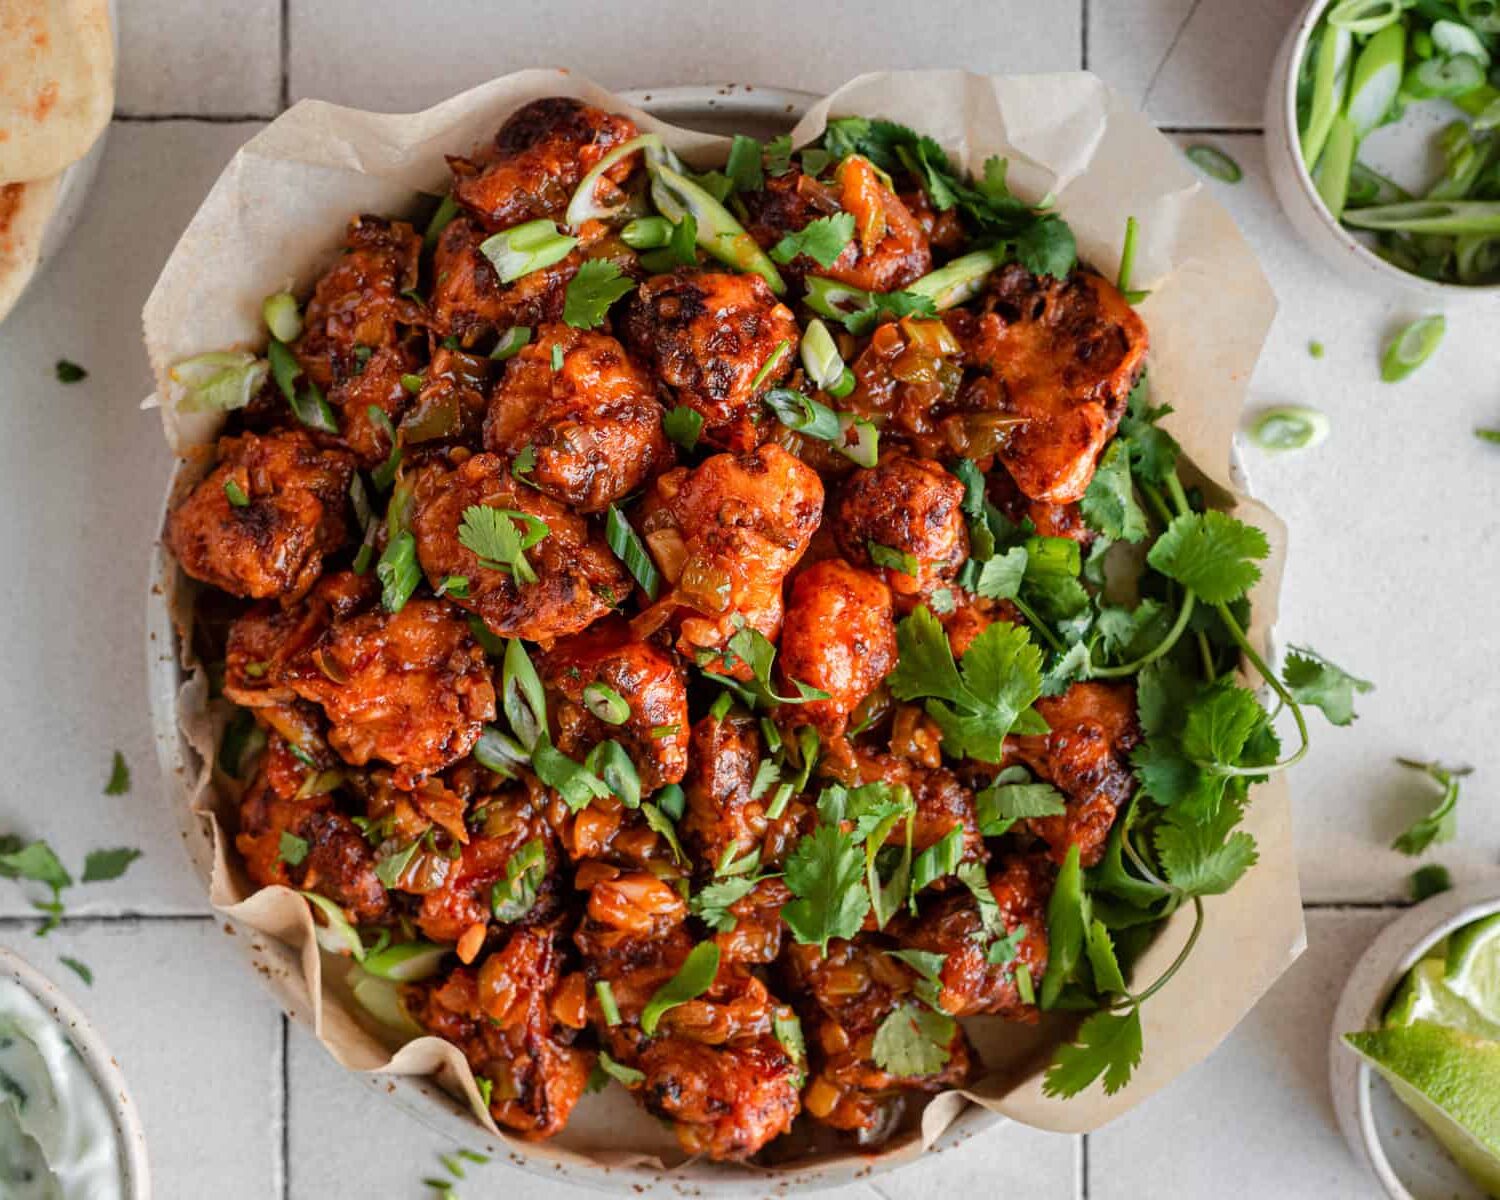 Gobi manchurian in a bowl garnished with green onions